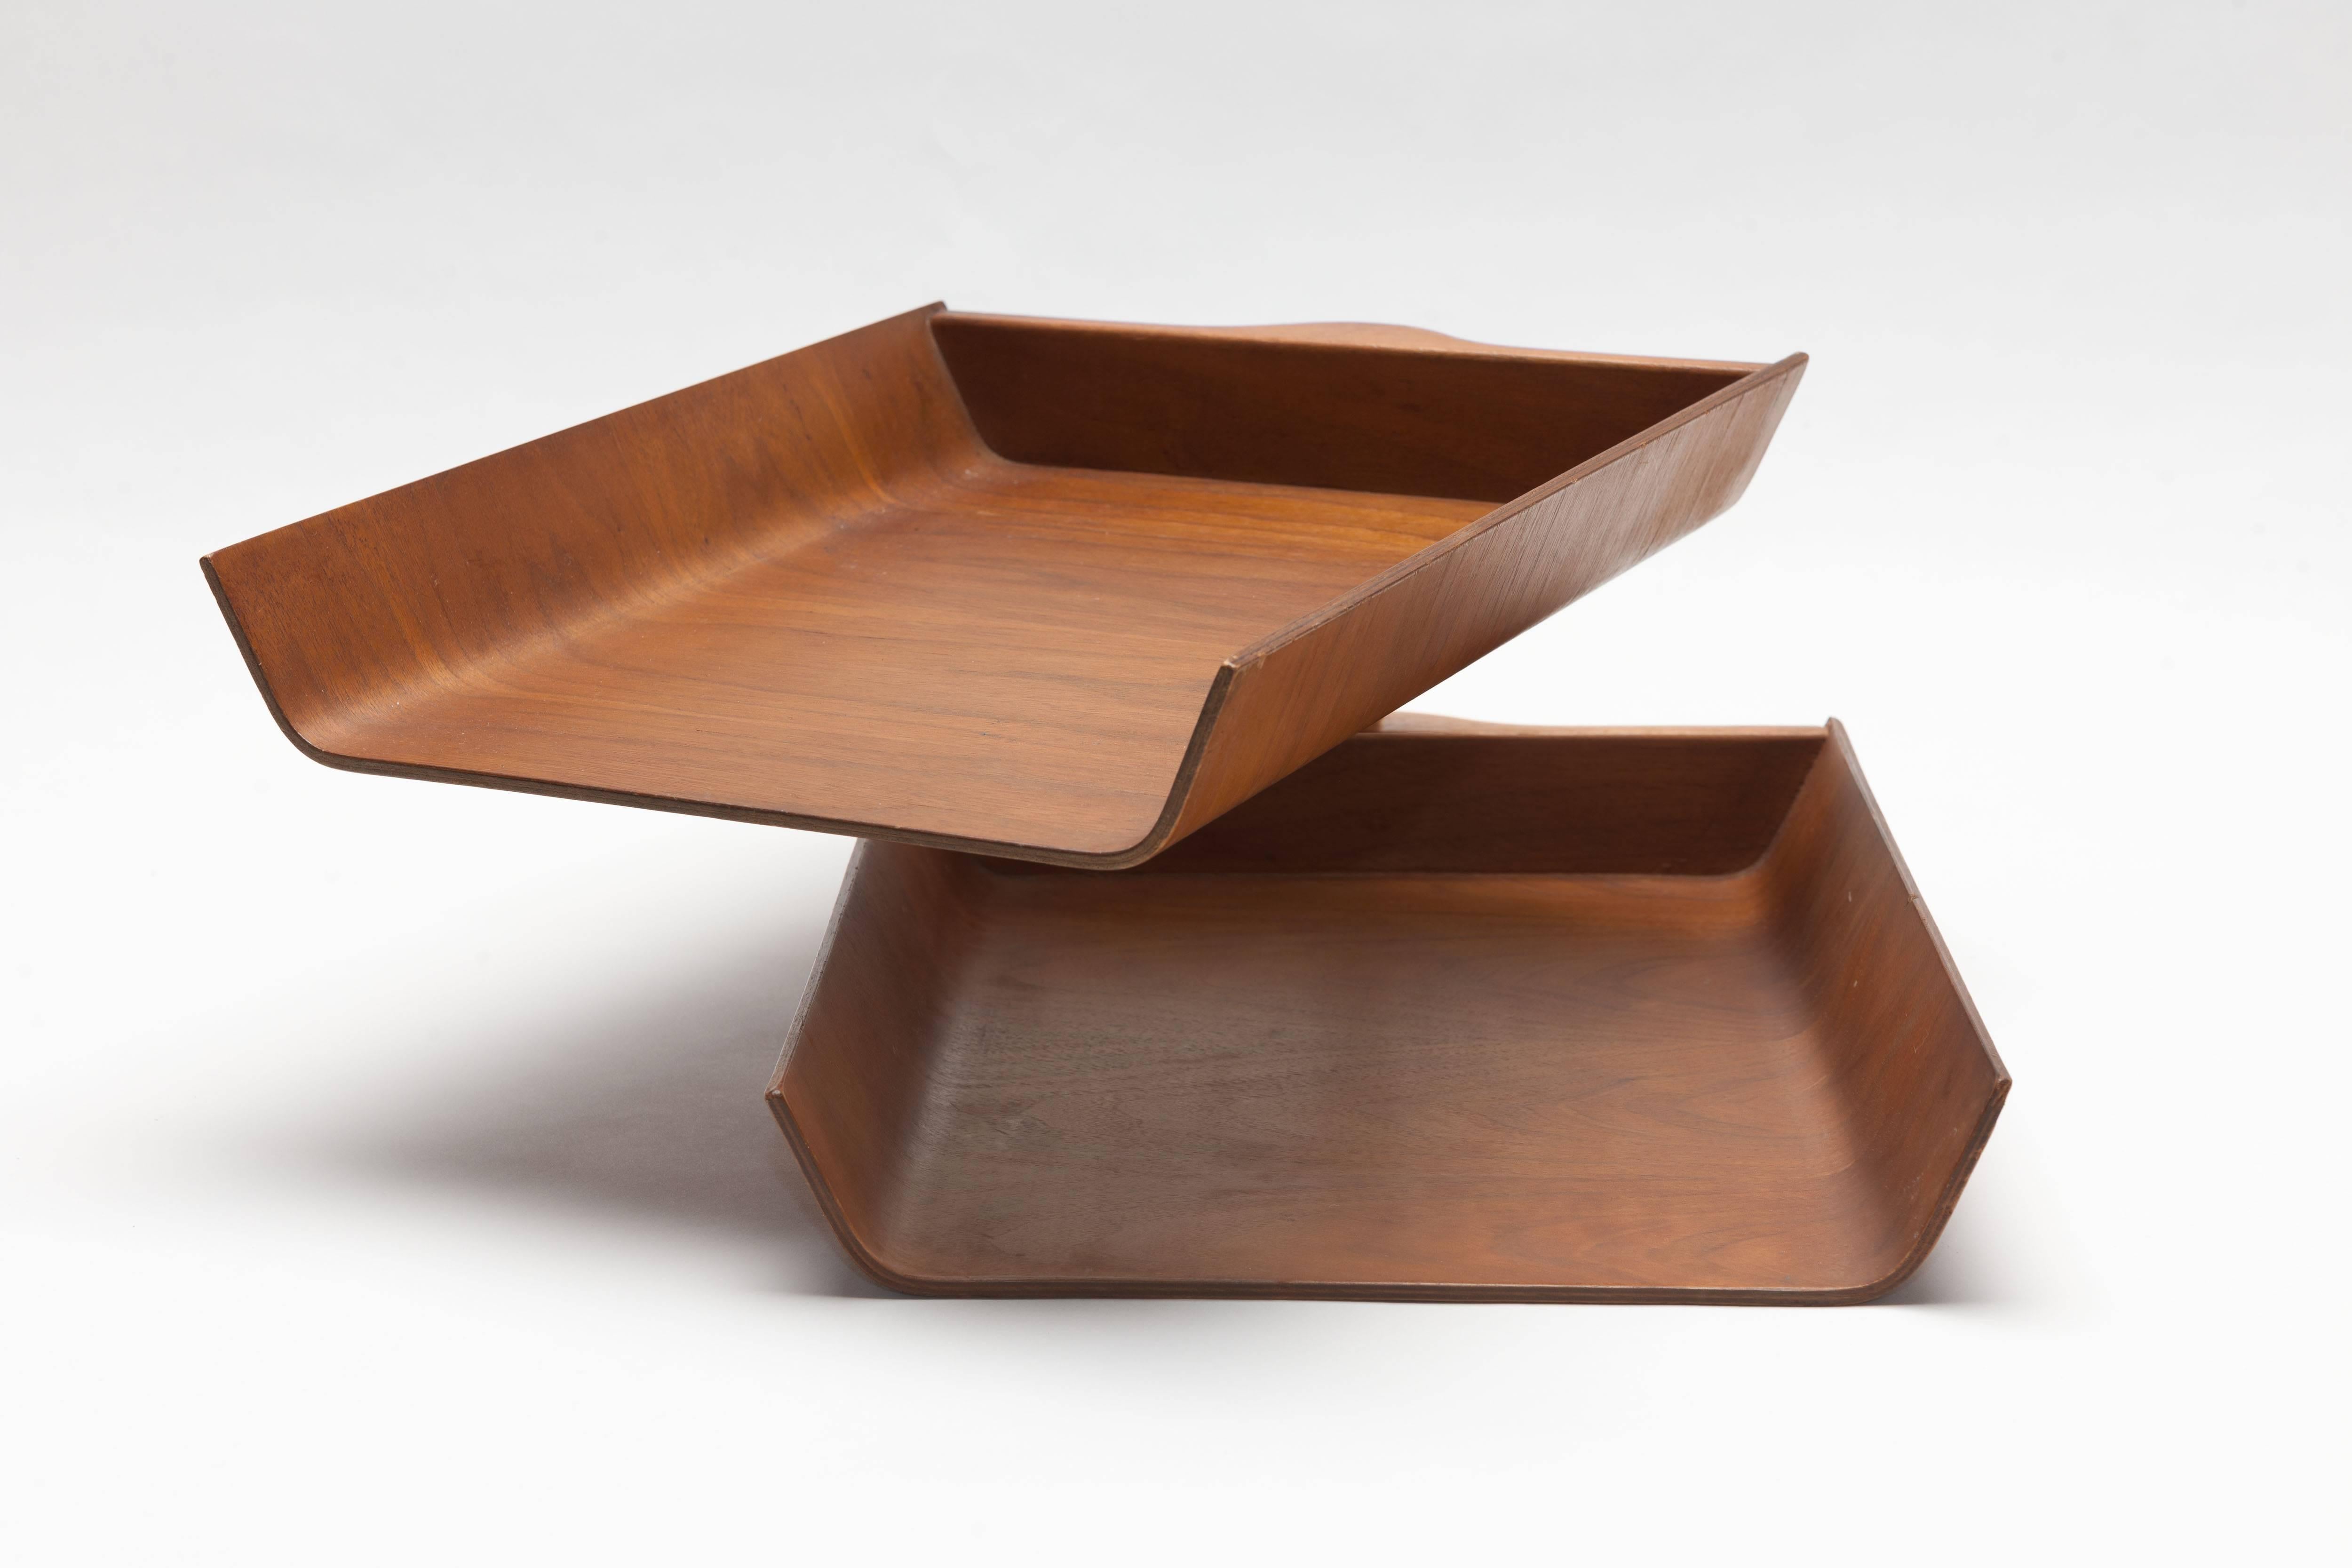 Two-tier molded walnut architectural plywood letter tray by Florence Knoll. An iconic, beautiful and practical desk accessory.
Tray comes in good and all original condition with a 1960 Knoll label to underside (see photo).